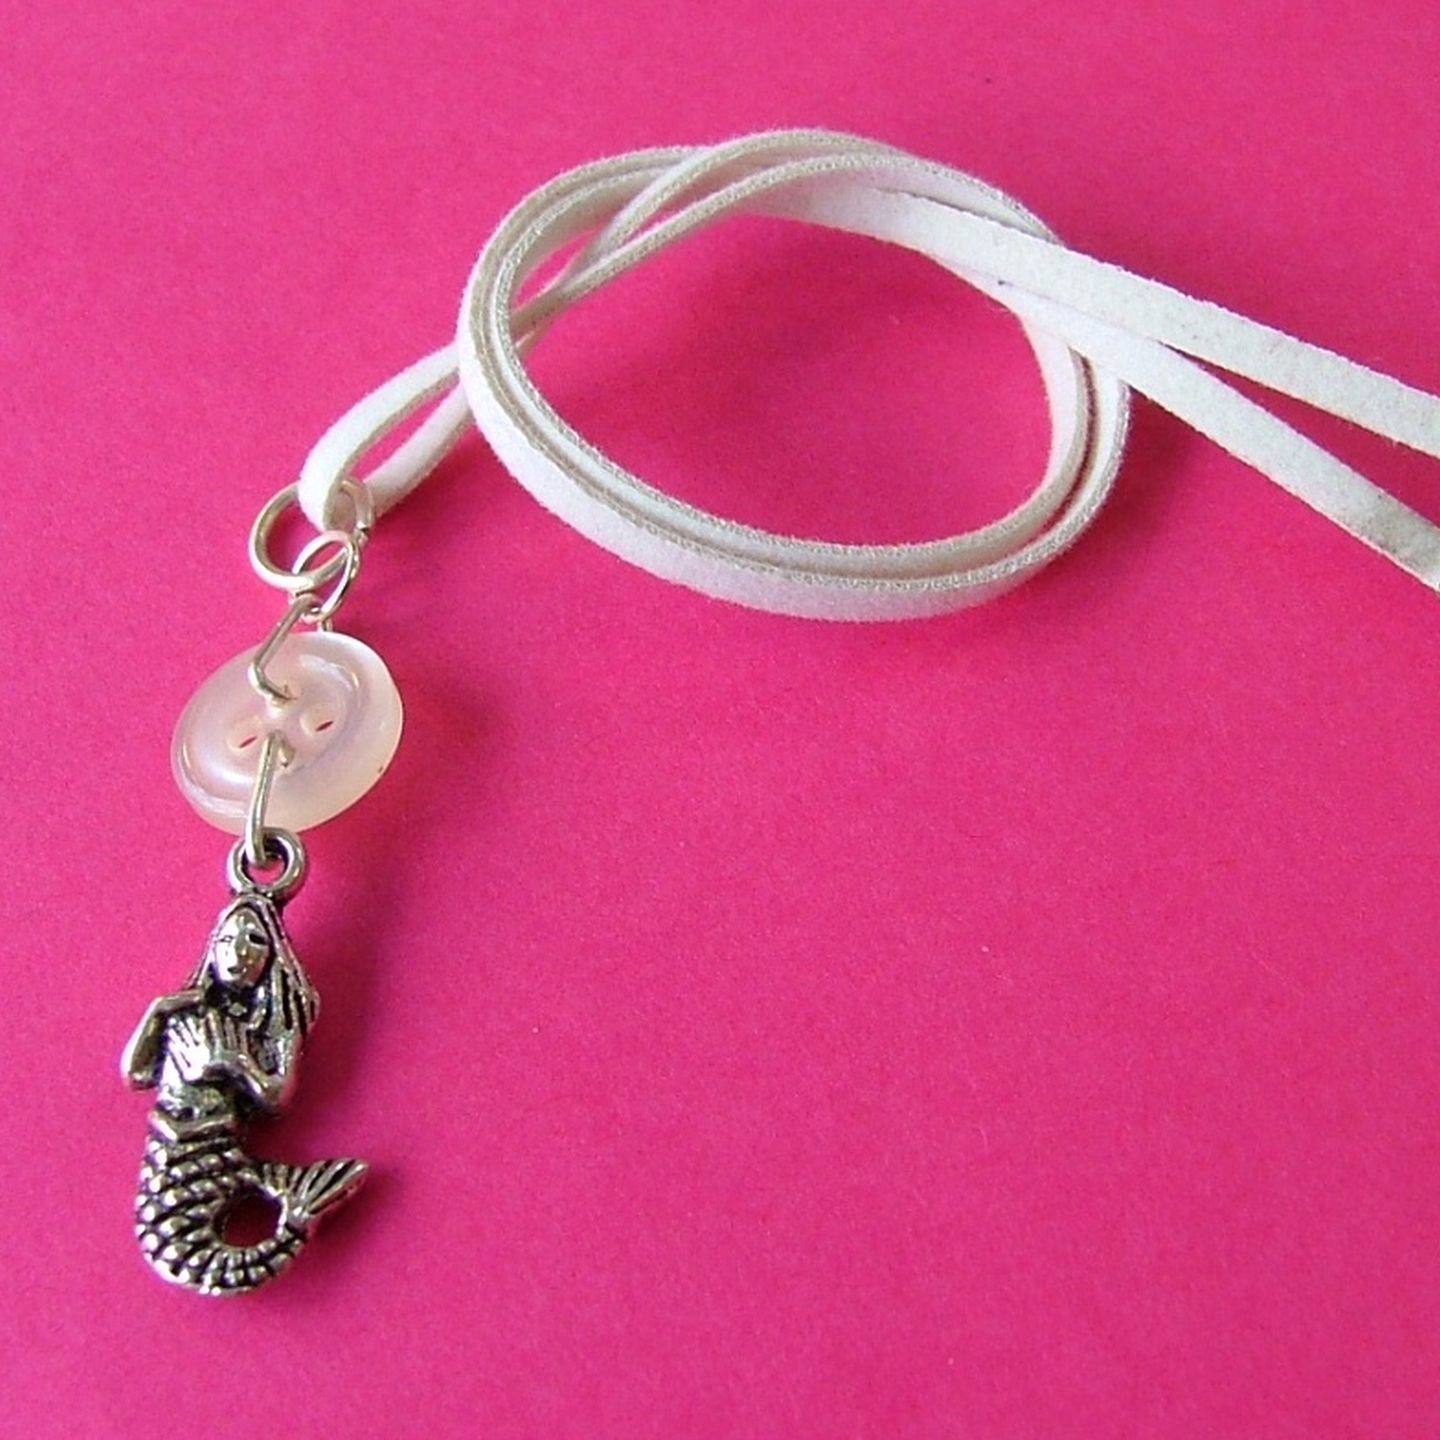 Mermaid Child’s Button Charm Necklace